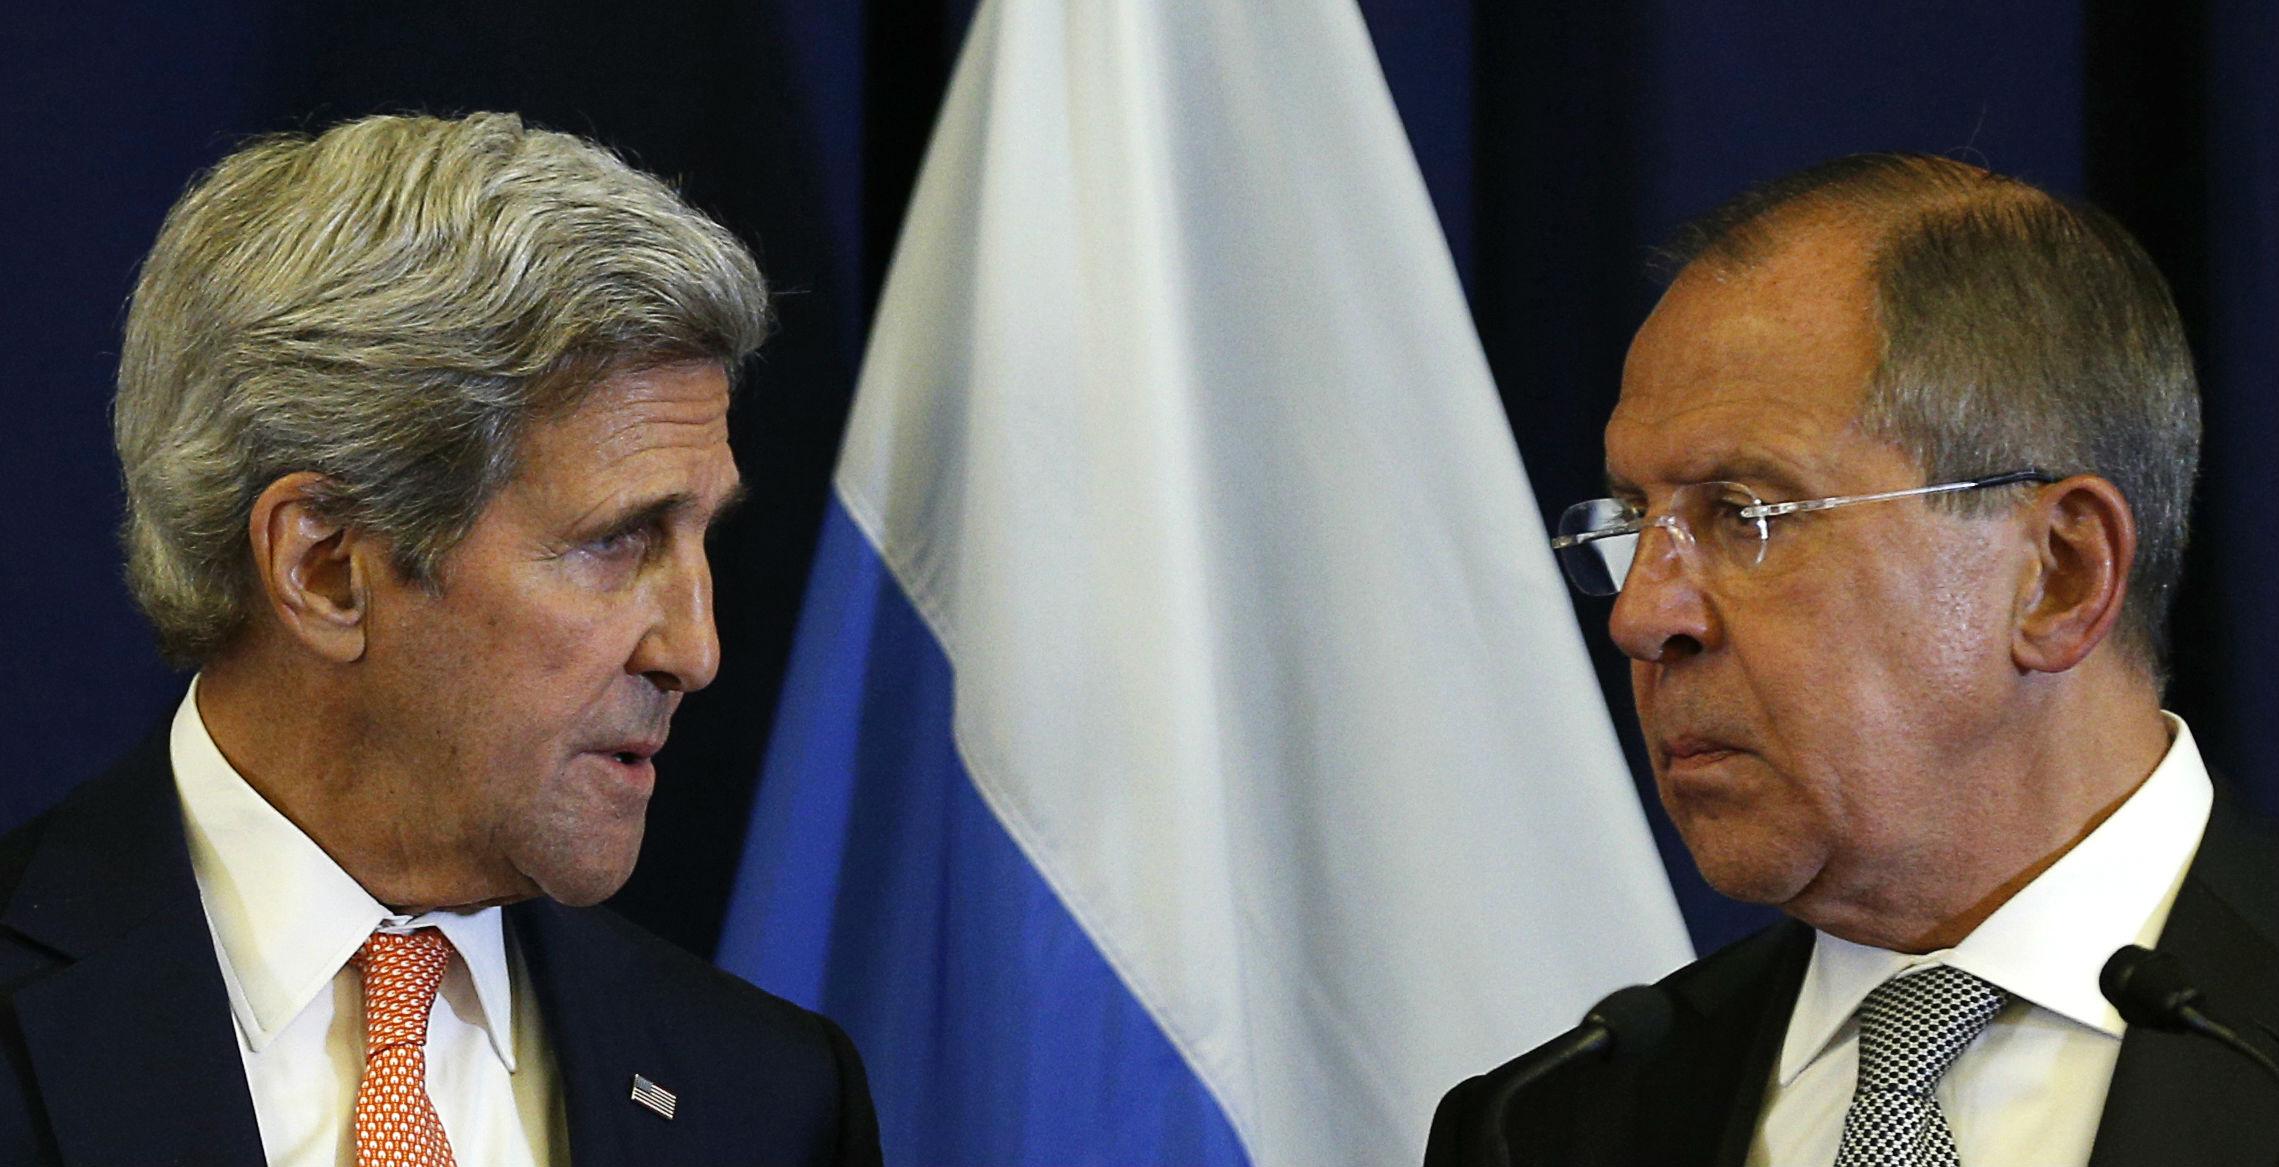 Relations between Kerry and Lavrov now at rock bottom